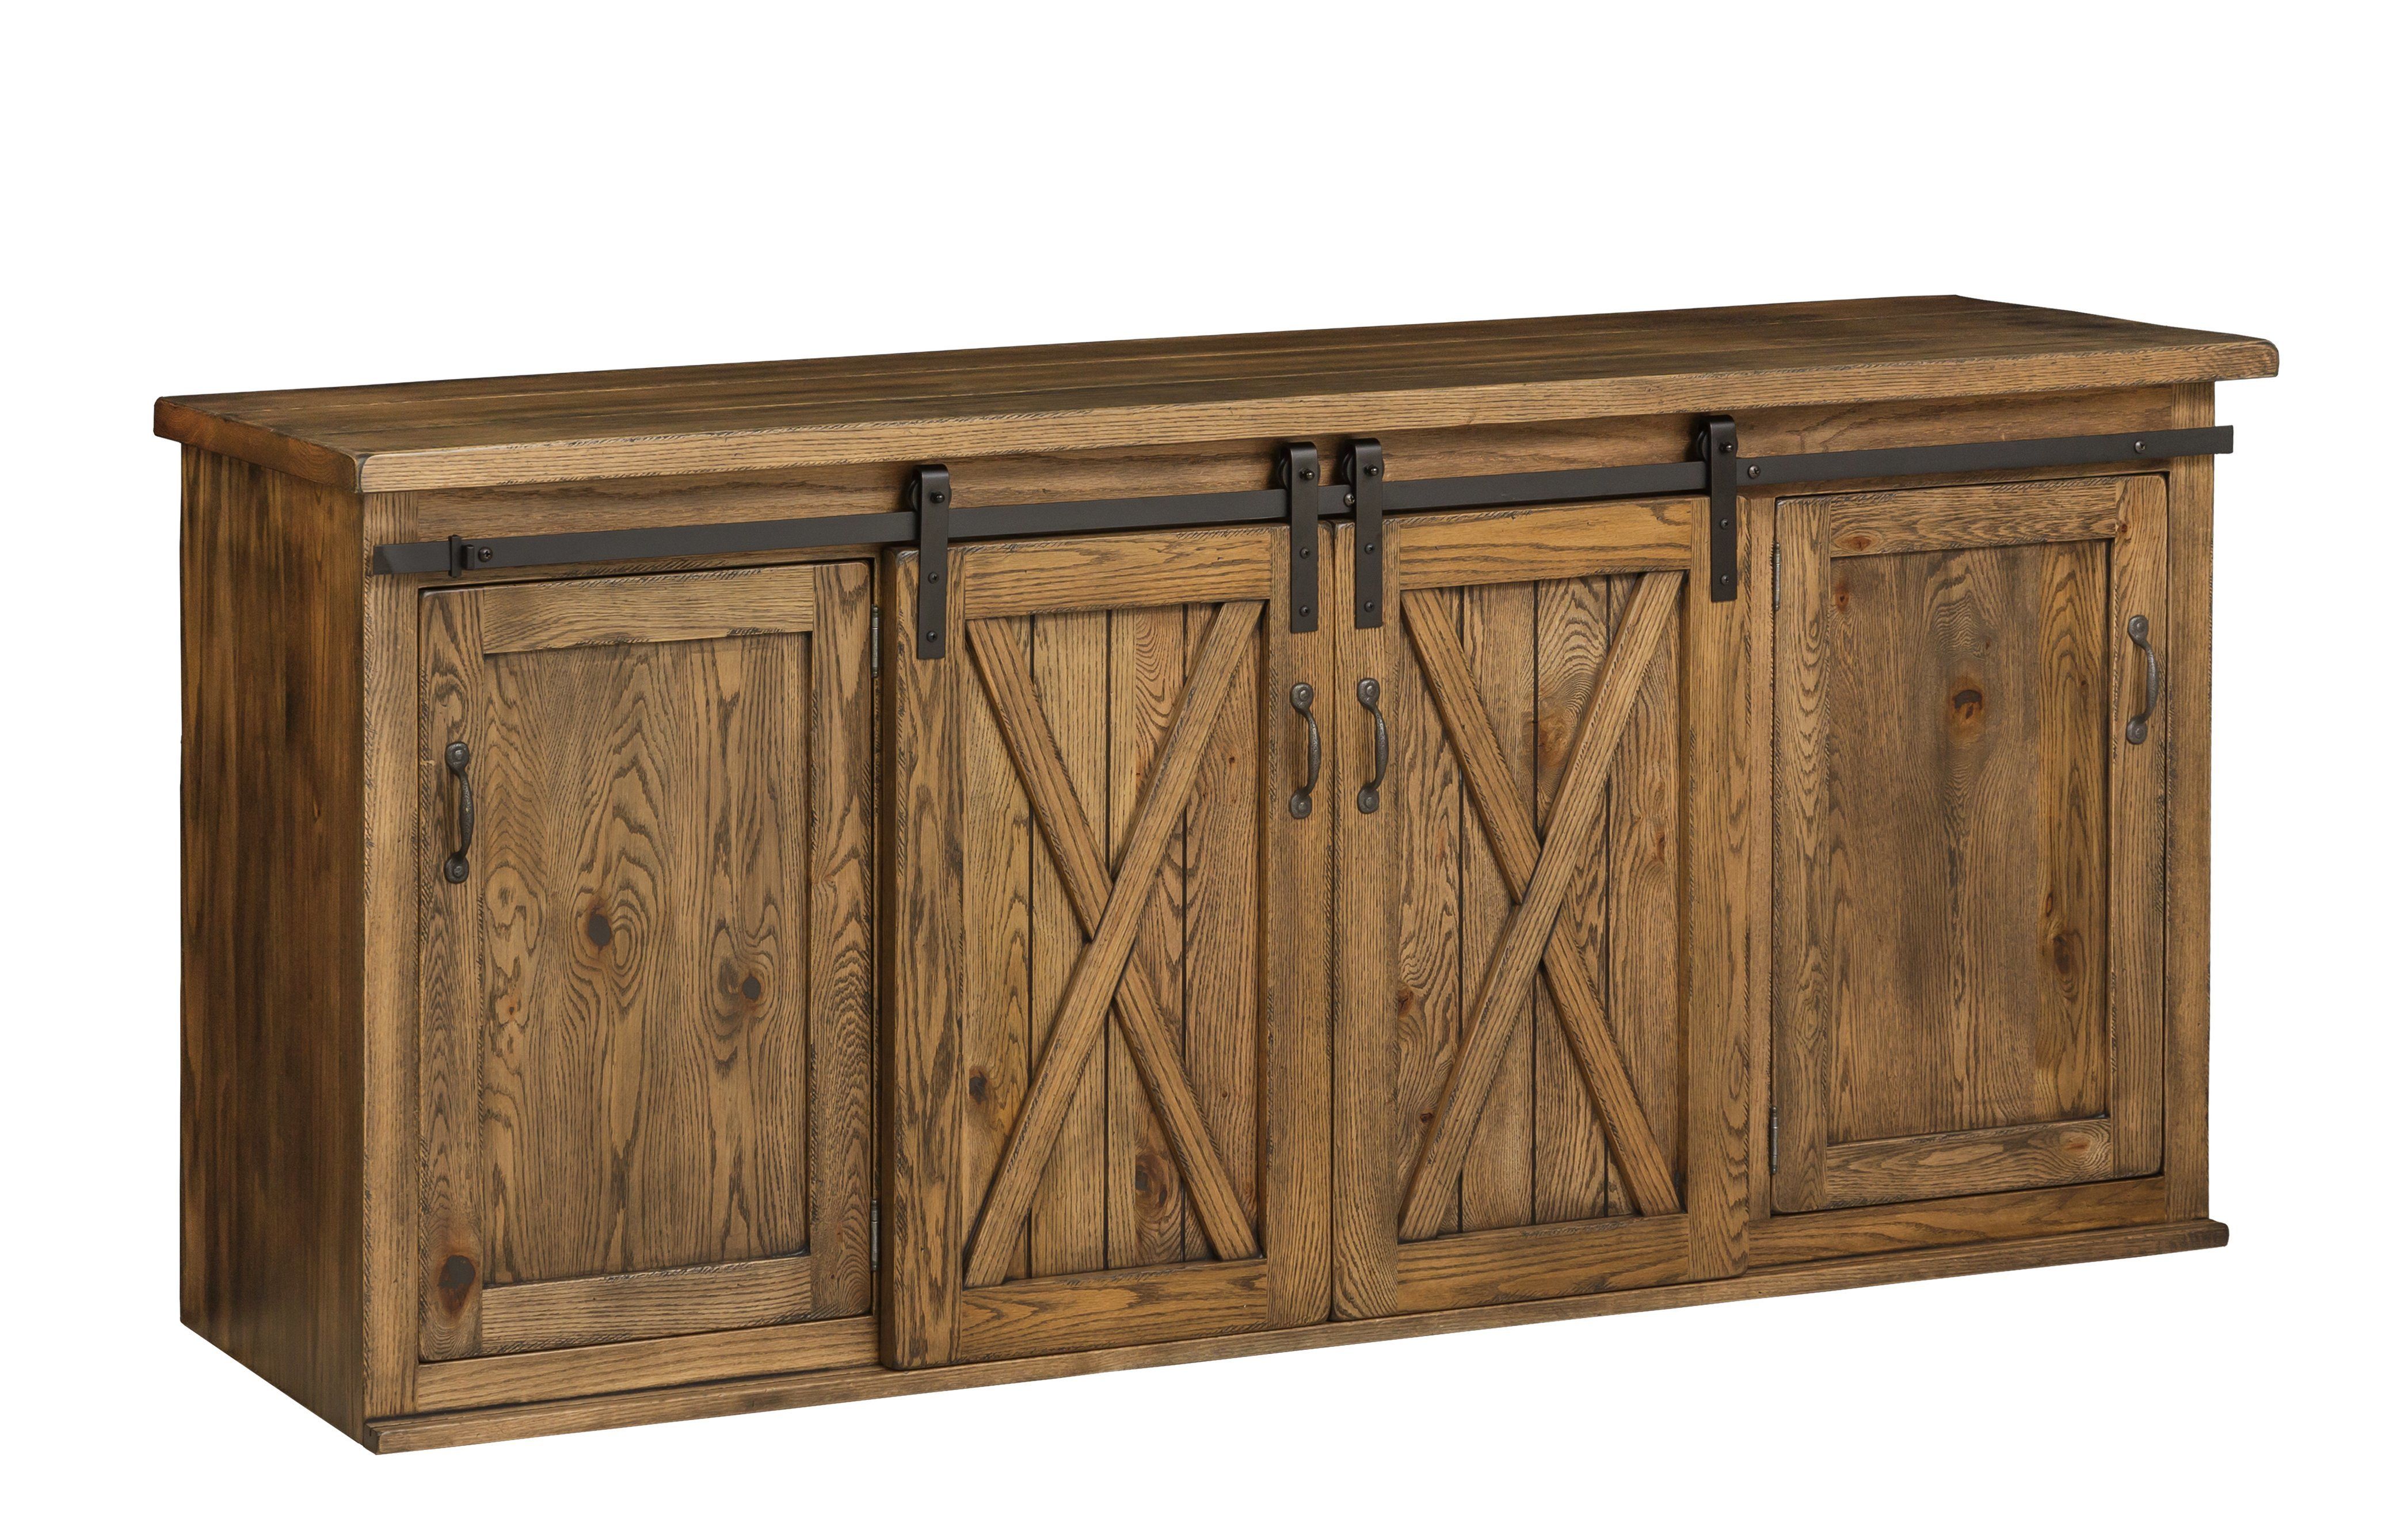 New England 74" Dining Buffet With Sliding Barn Doors From Intended For Most Recently Released Sideboards Double Barn Door Buffet (View 2 of 15)